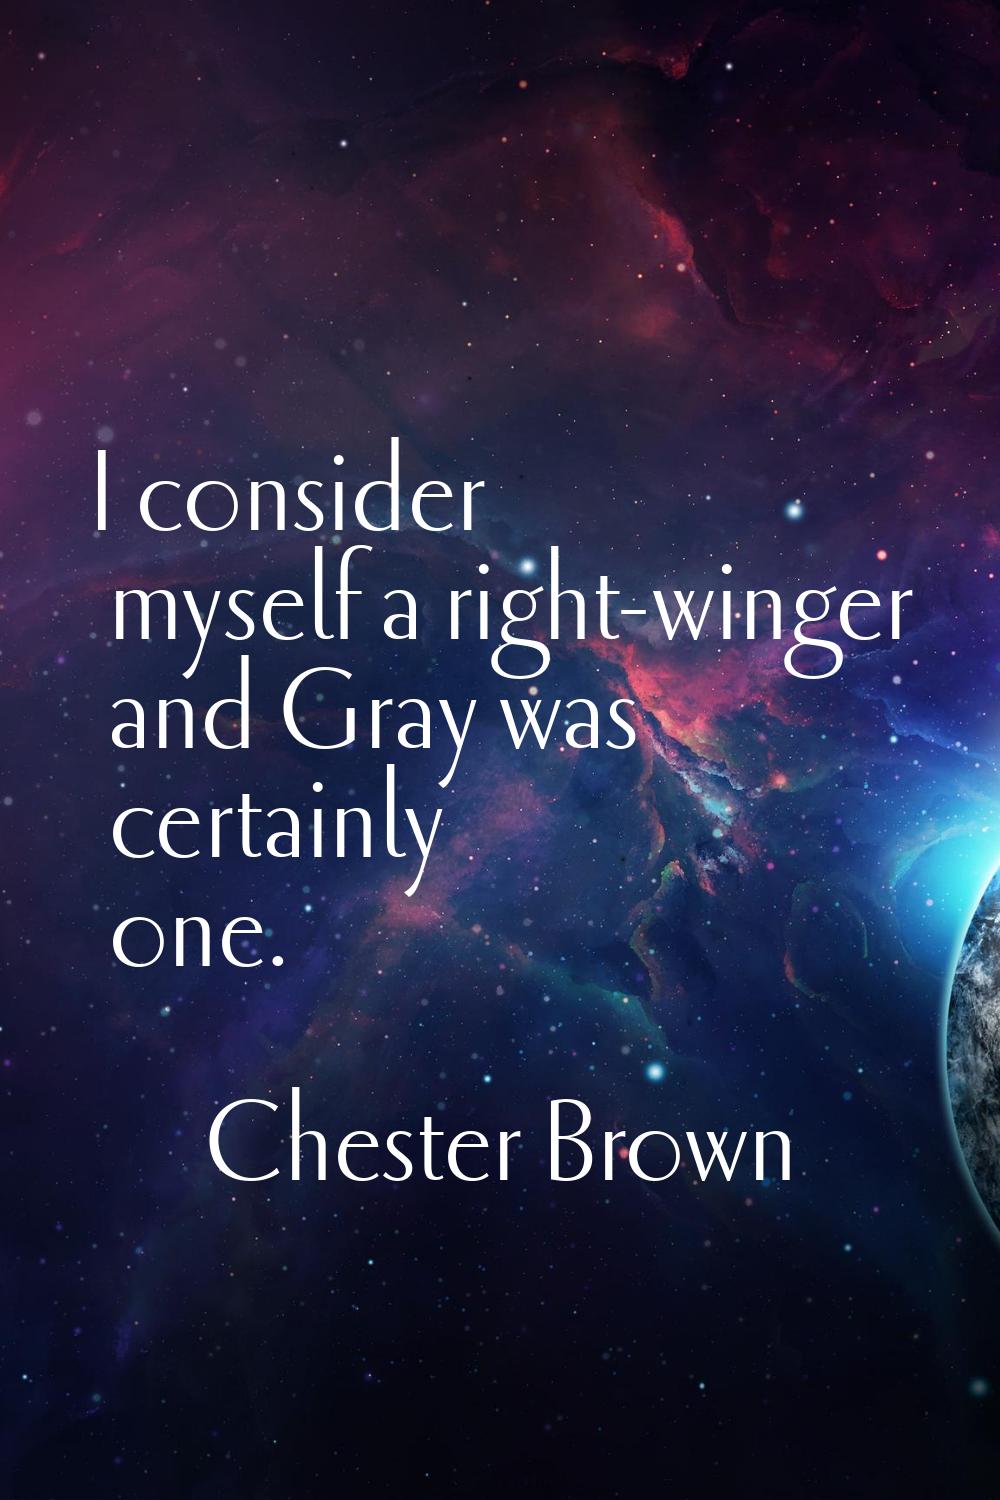 I consider myself a right-winger and Gray was certainly one.